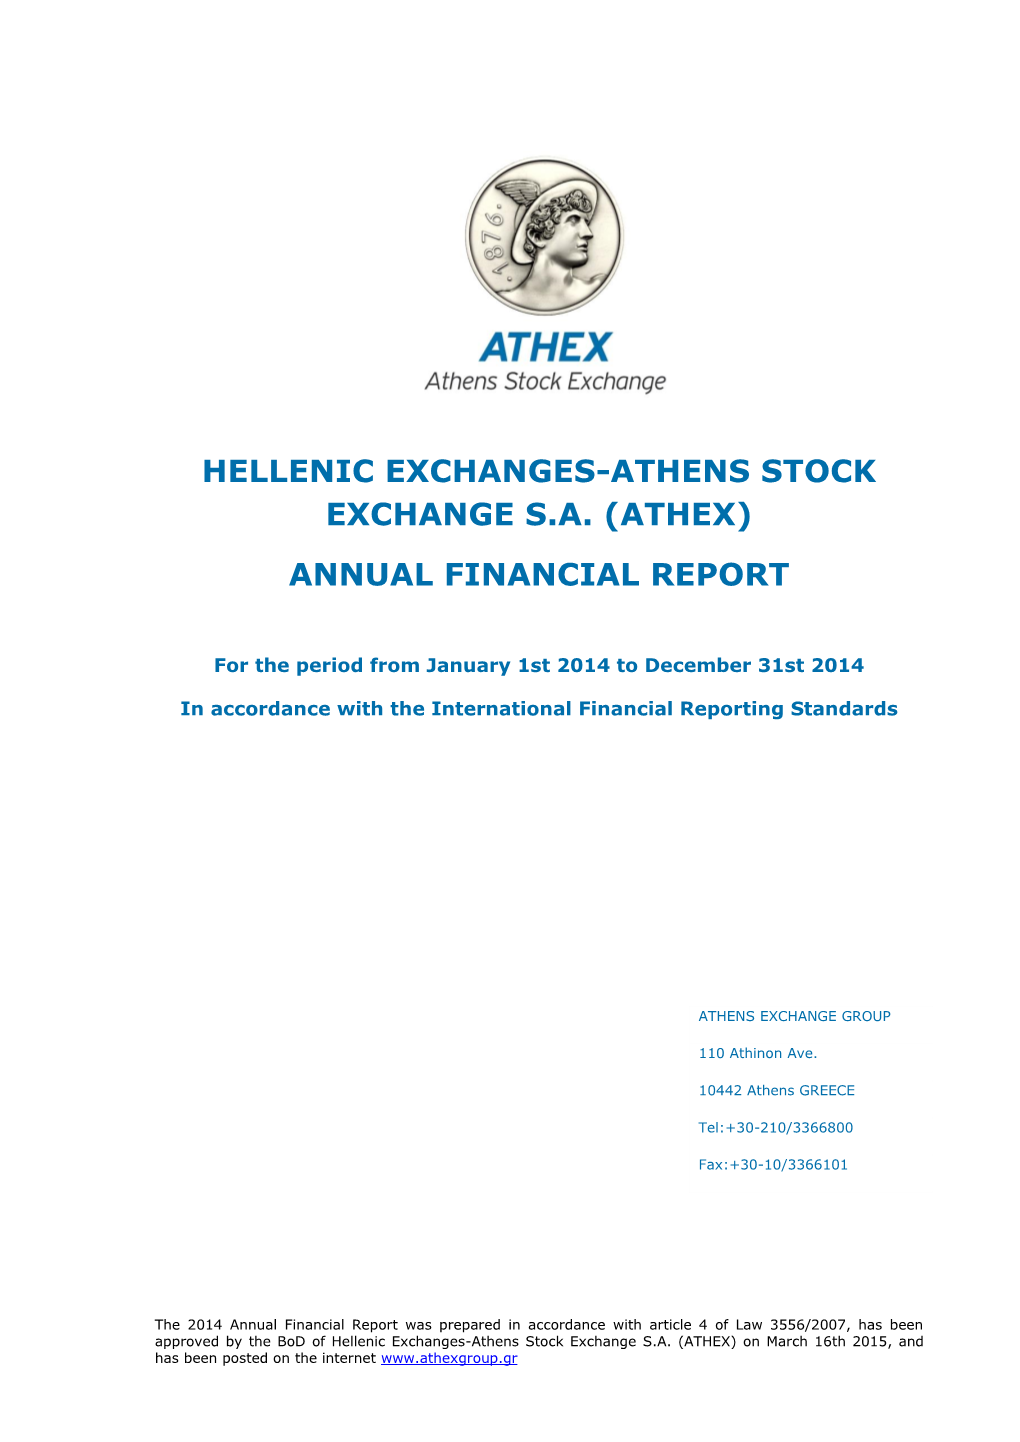 Hellenic Exchanges-Athens Stock Exchange SA Group (ATHEX) Has Been Prepared for the Fiscal Year 1.1.2014 - 31.12.2014